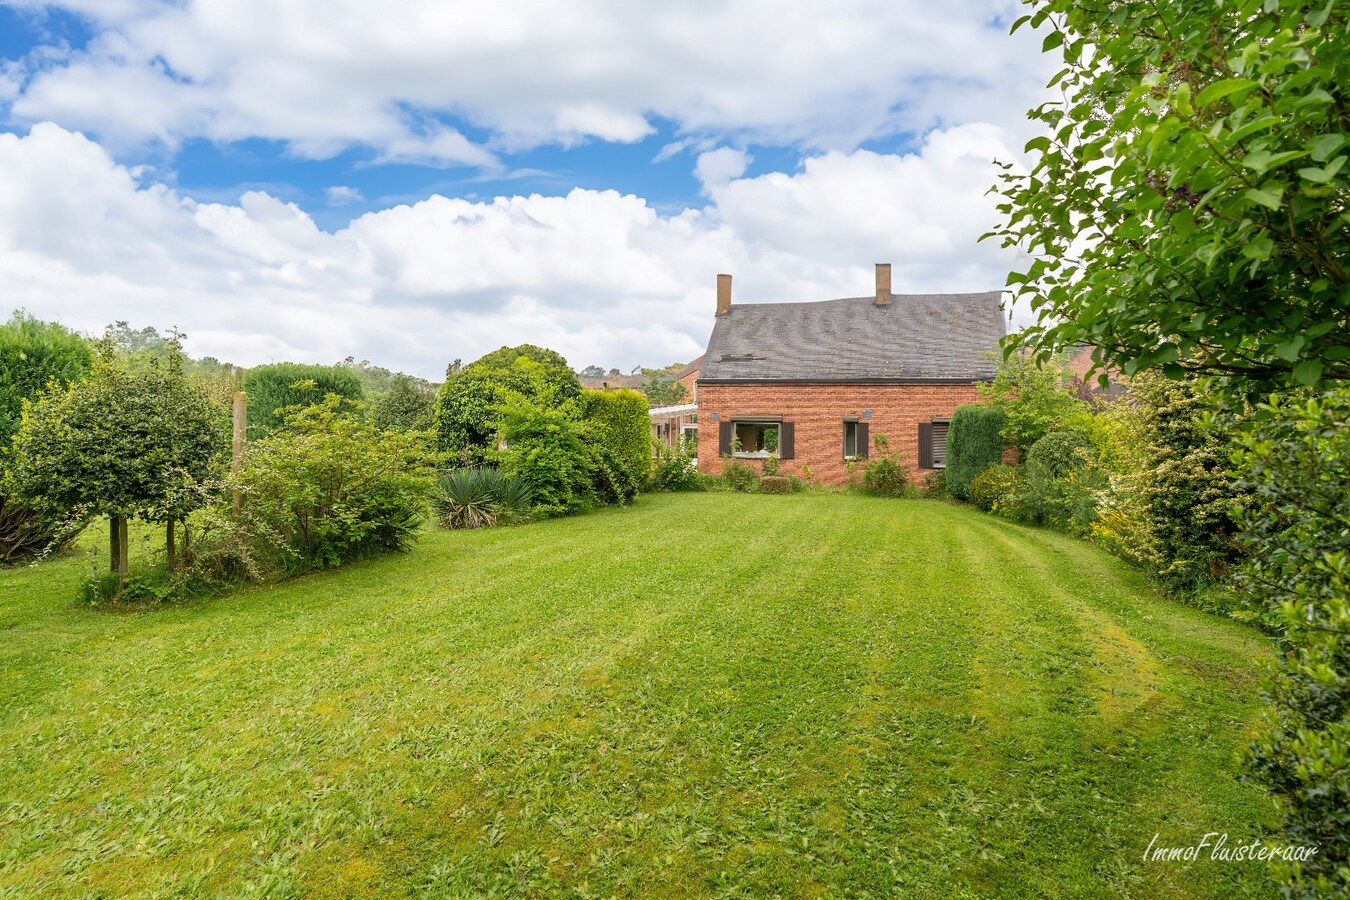 Authentic, to be renovated house with an idyllic garden on approximately 95 acres. 